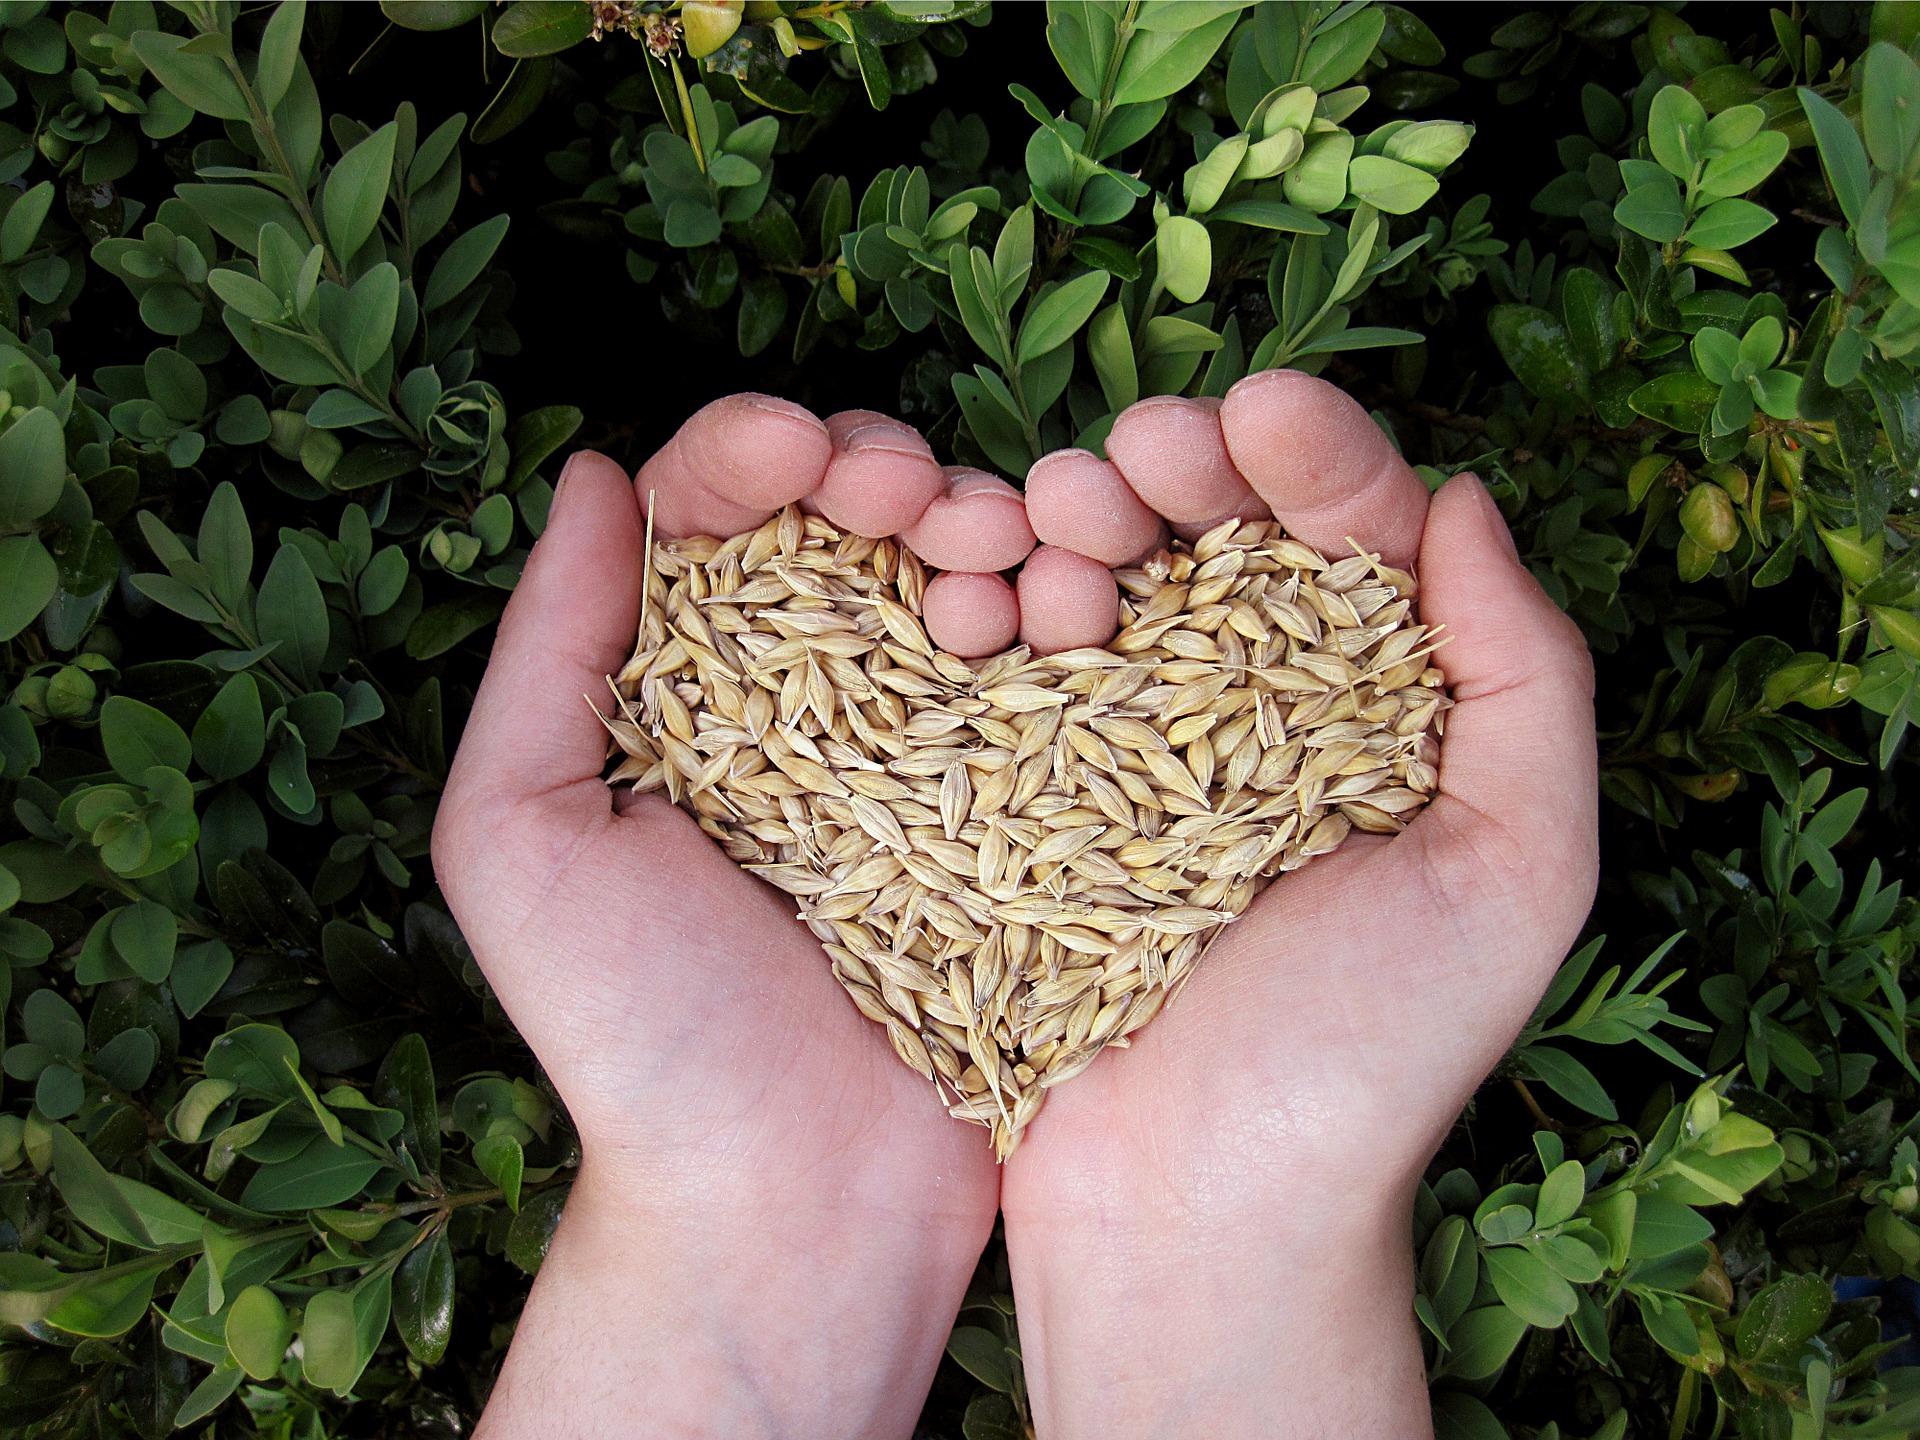 Hands with oats in shape of heart